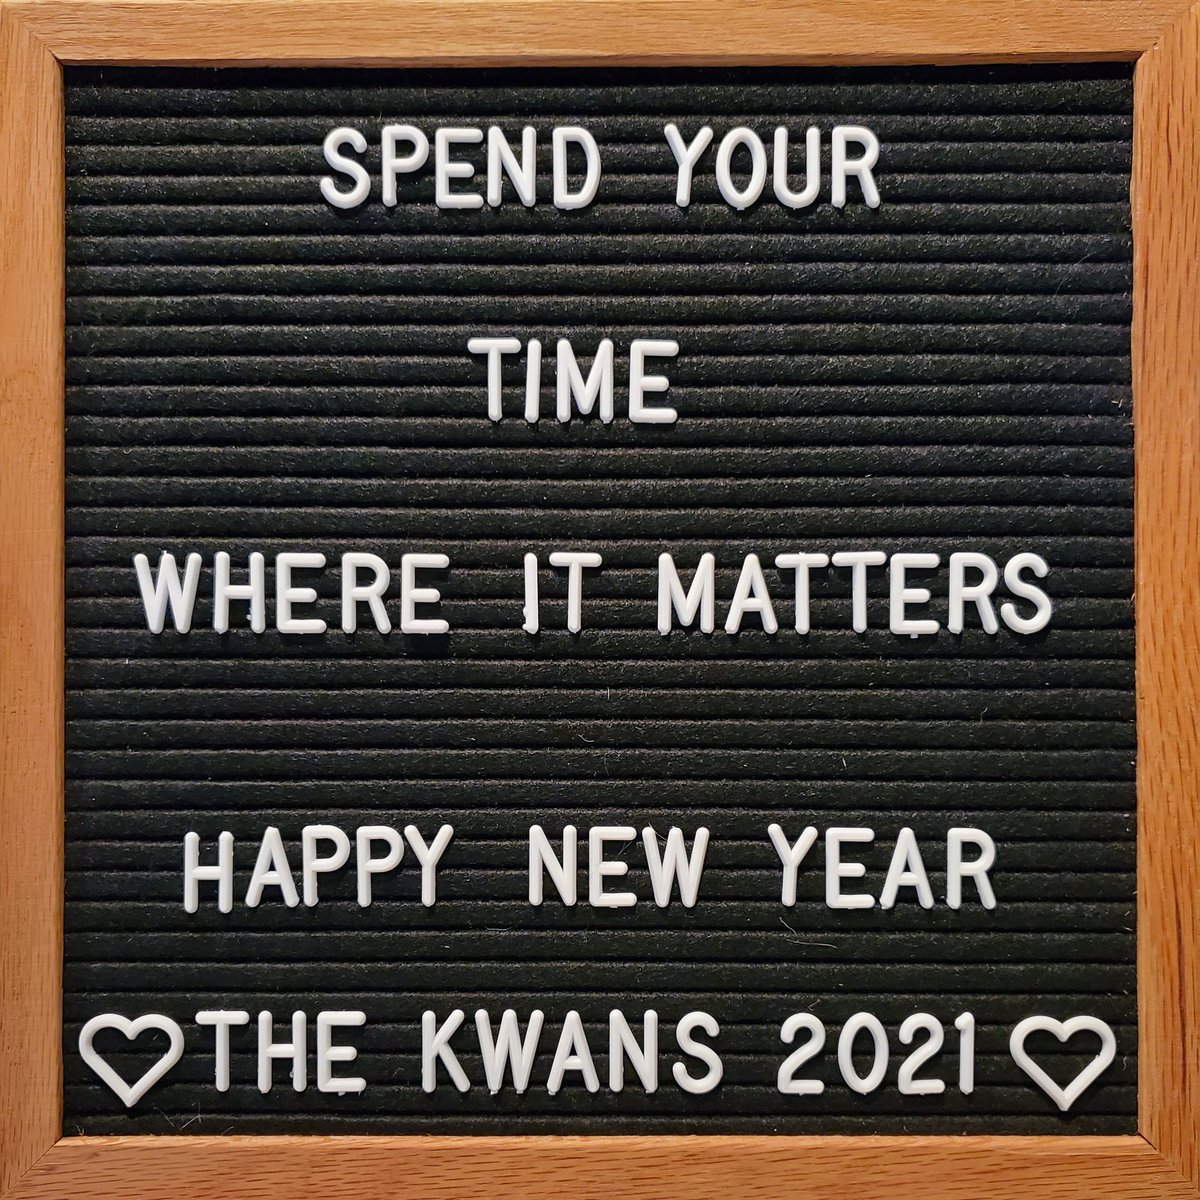 More than ever, this is the mantra I'll try to keep top of mind for 2021. Glad to be through 2020. What matters to you?
.
#spendyourtimeonwhatmatters #spendyourtimewisely #gottagetbackrunning #cantstopwontstop #gentwithstents